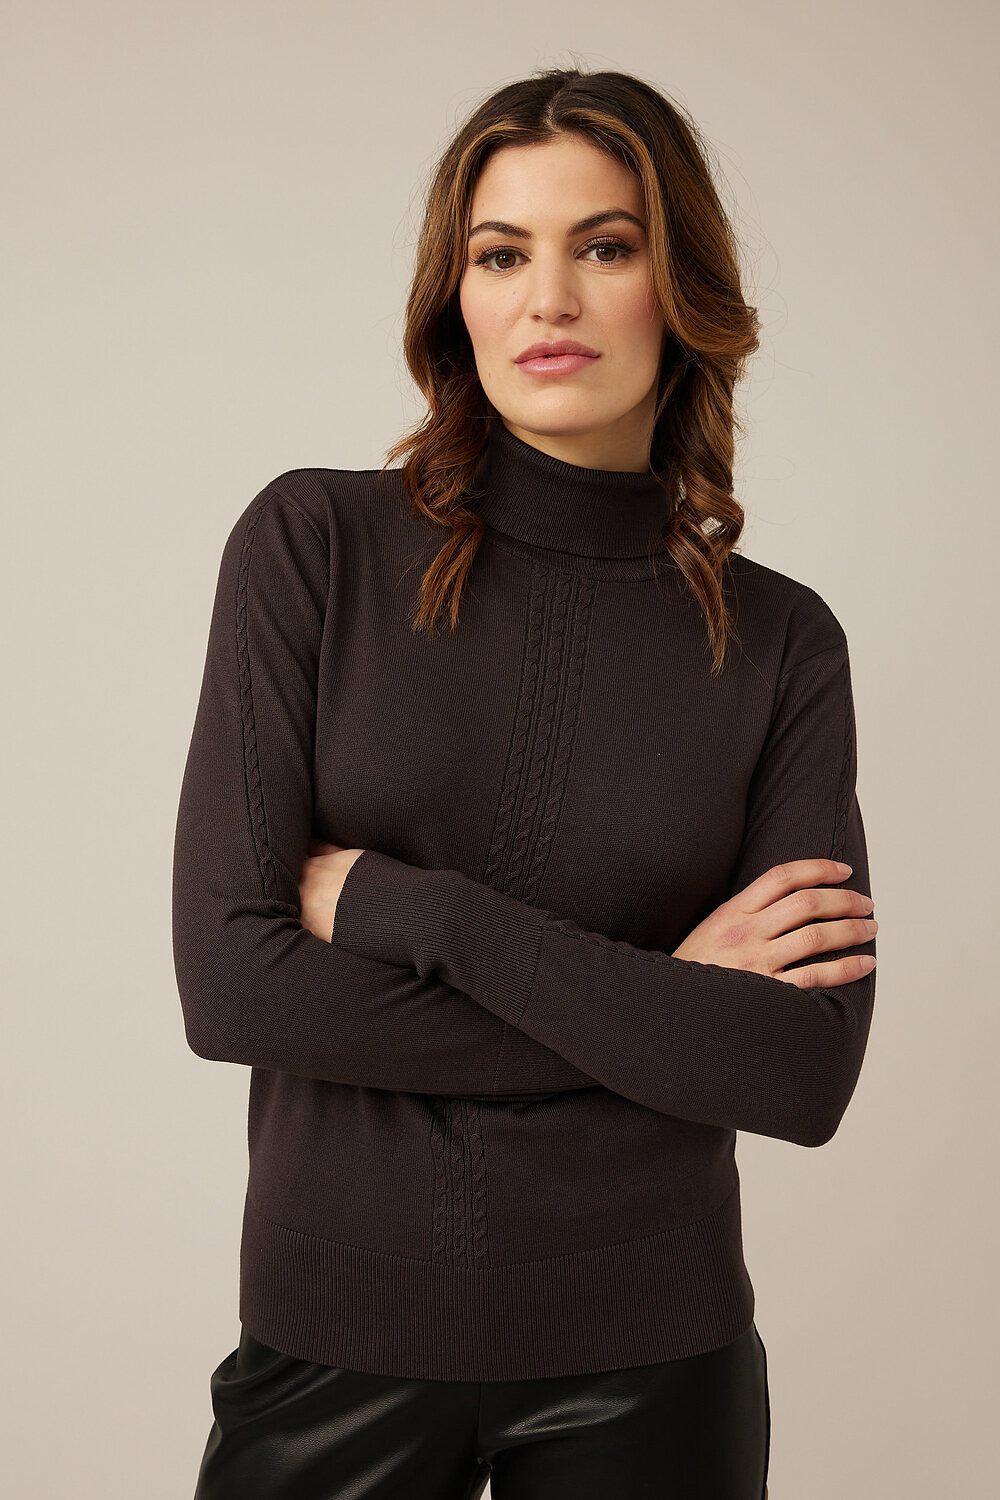 Emproved Cable Knit Detail Turtleneck Top Style H2212. Black